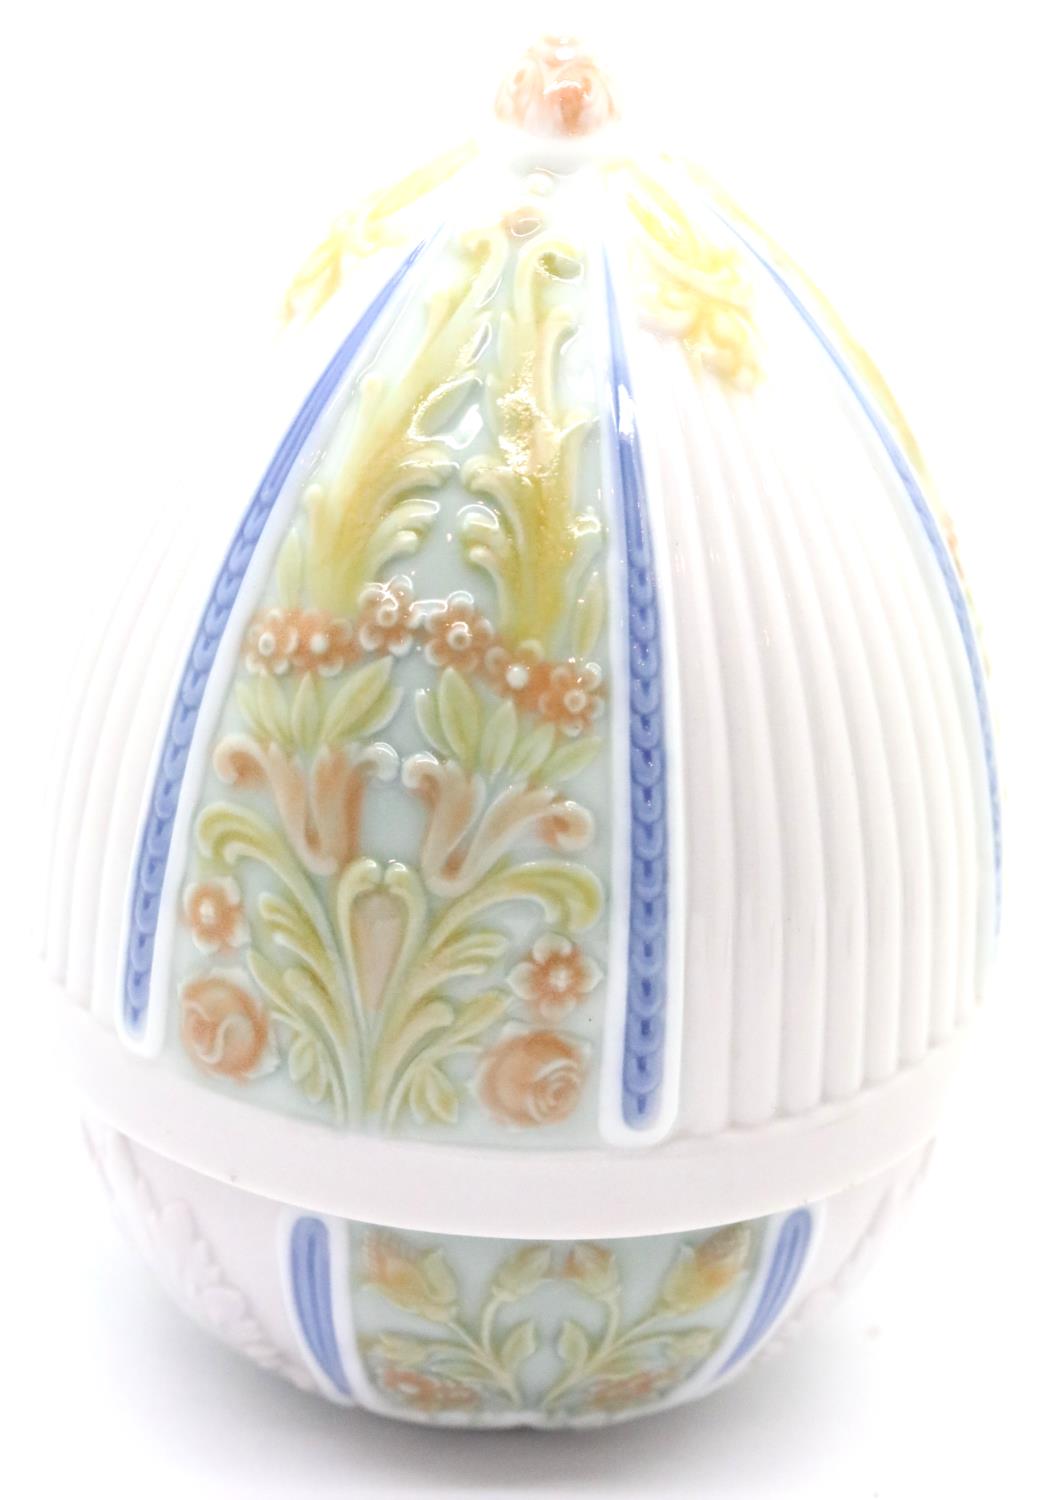 Rare Lladro Roses egg, H: 12 cm. P&P Group 2 (£18+VAT for the first lot and £3+VAT for subsequent